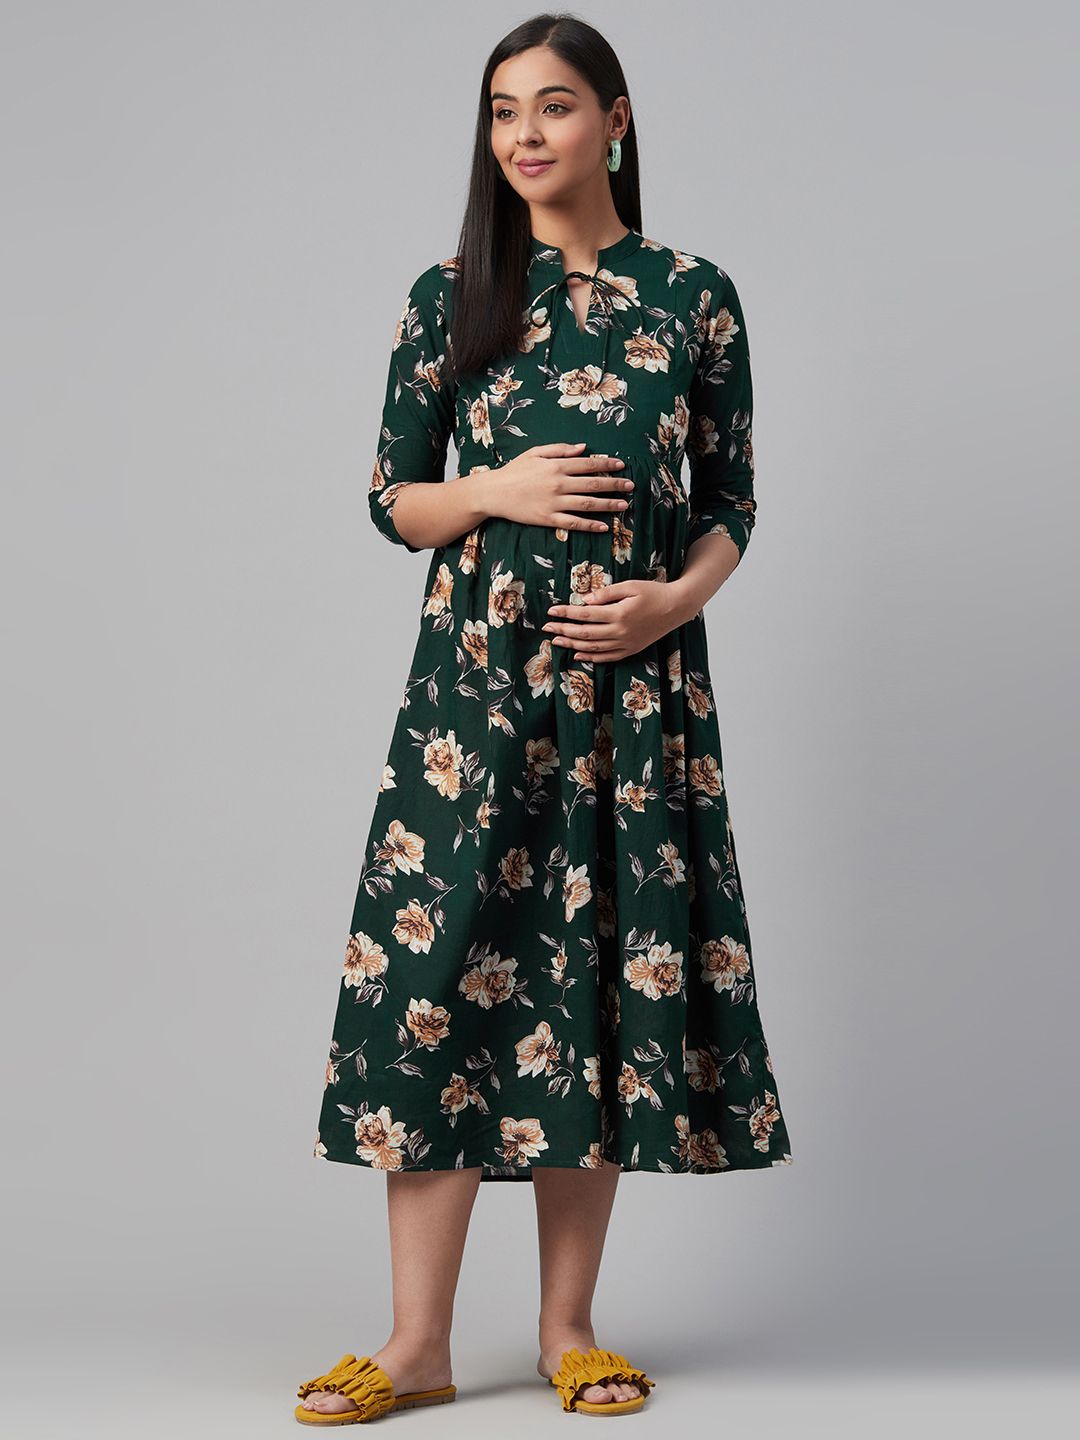 anayna Green & Beige Floral Print Cotton Maternity A-Line Dress Price in India